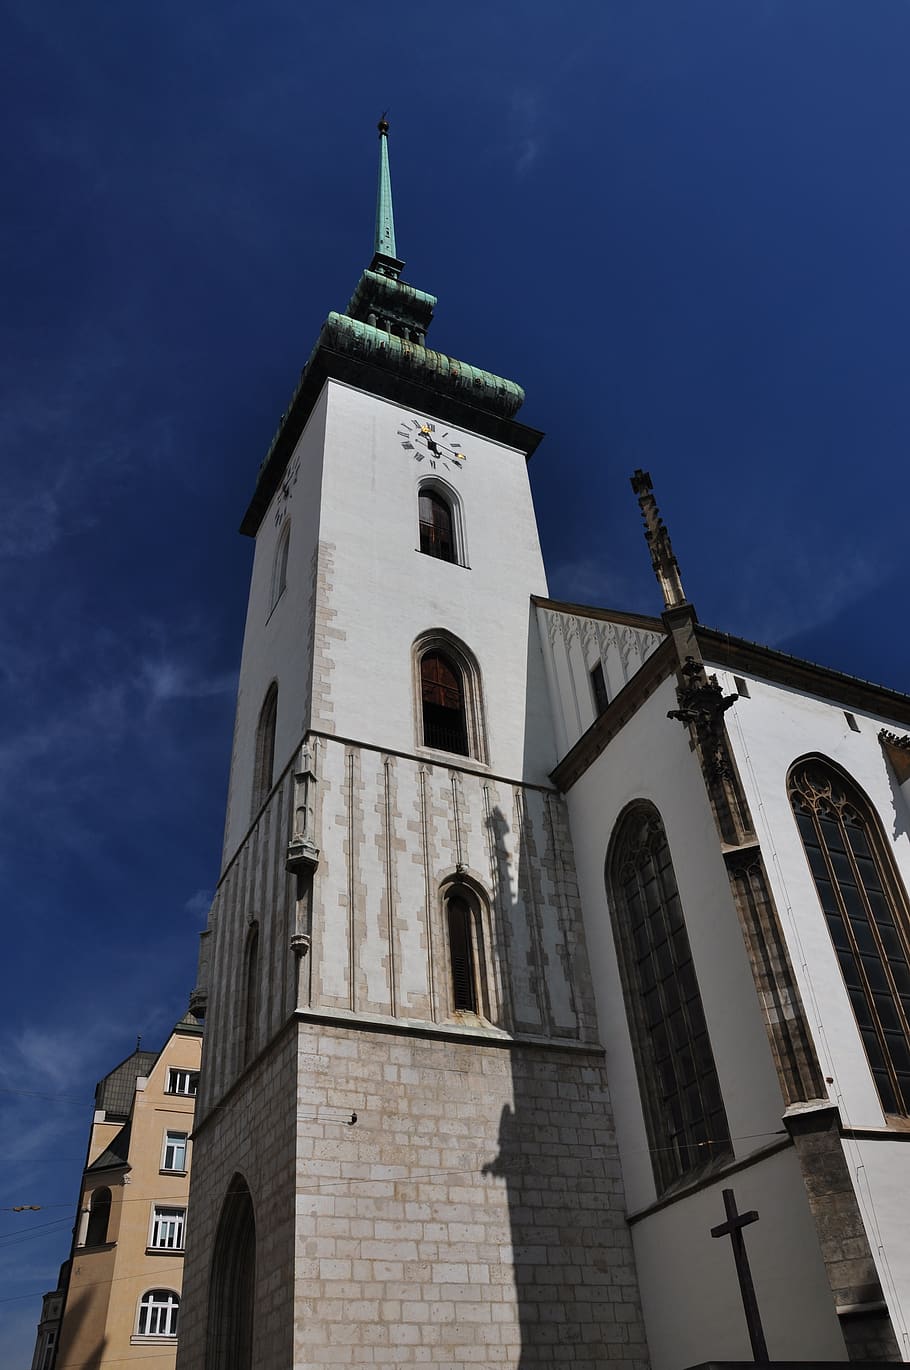 church, the church of st, jakub, jacob in brno, monument, architecture, sacral, old, tower, steeple